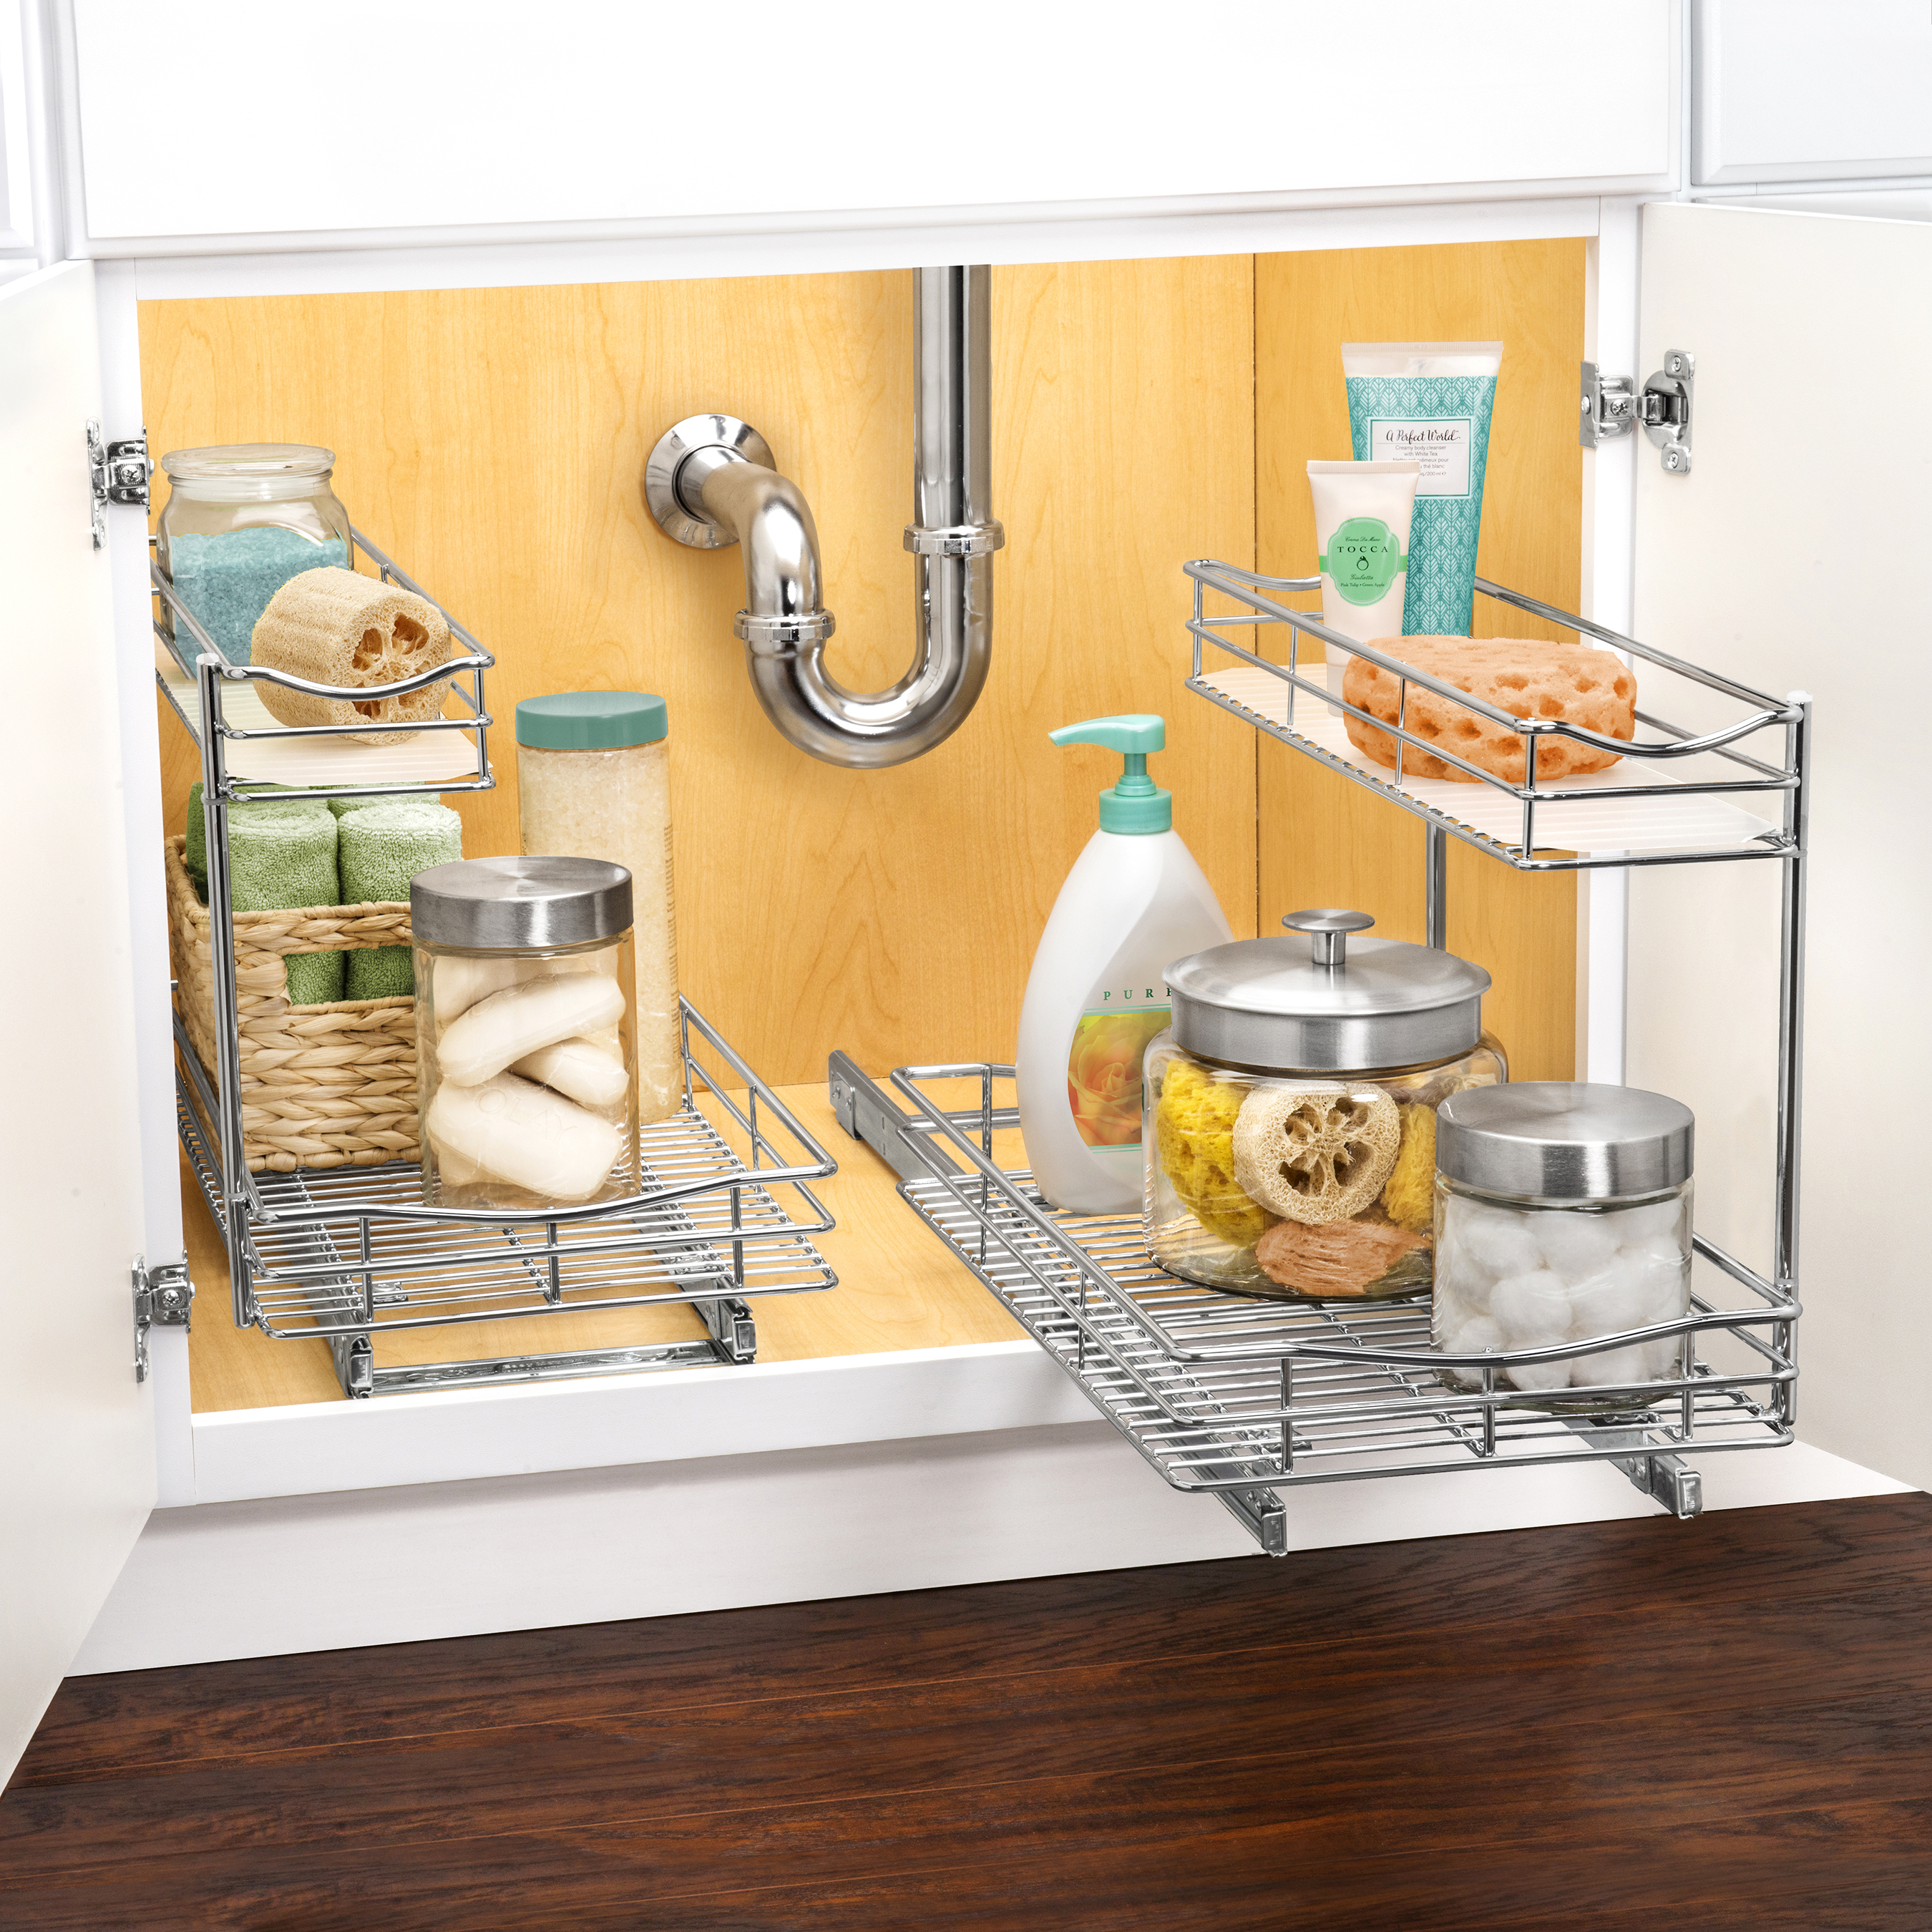 https://www.lynkinc.com/wp-content/uploads/2018/01/Lynk-451118DS_4-PROFESSIONAL-Roll-Out-Under-Sink-Organizer-11.5in-x-18in-1.jpg